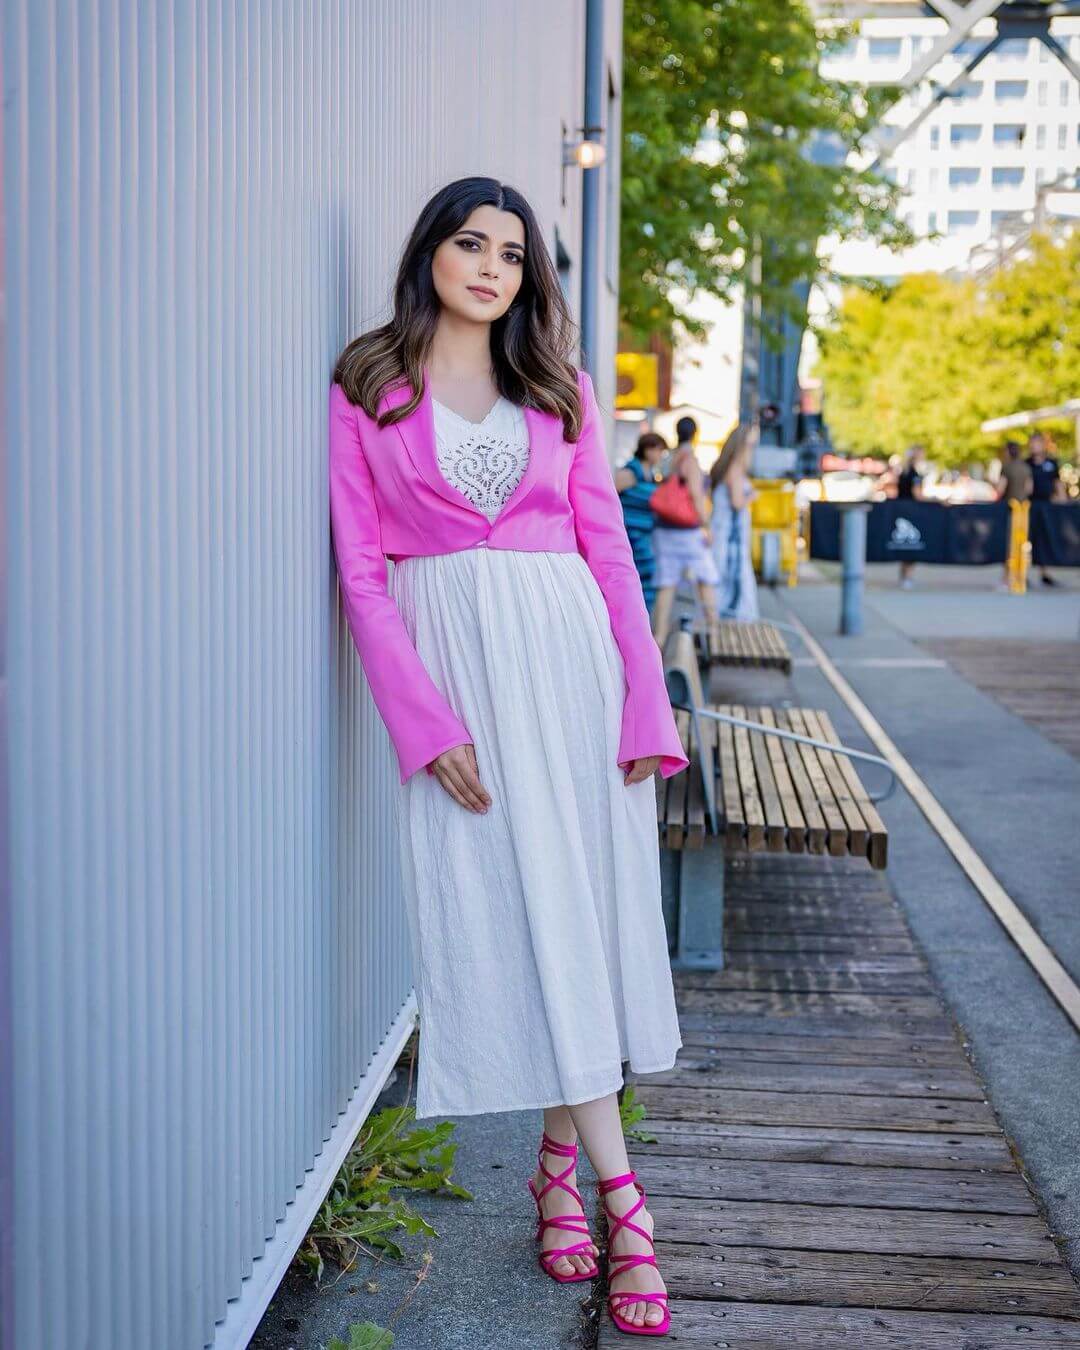 Nimrat Khaira Vibrant Look In White Dress With Pink Jacket Outfit